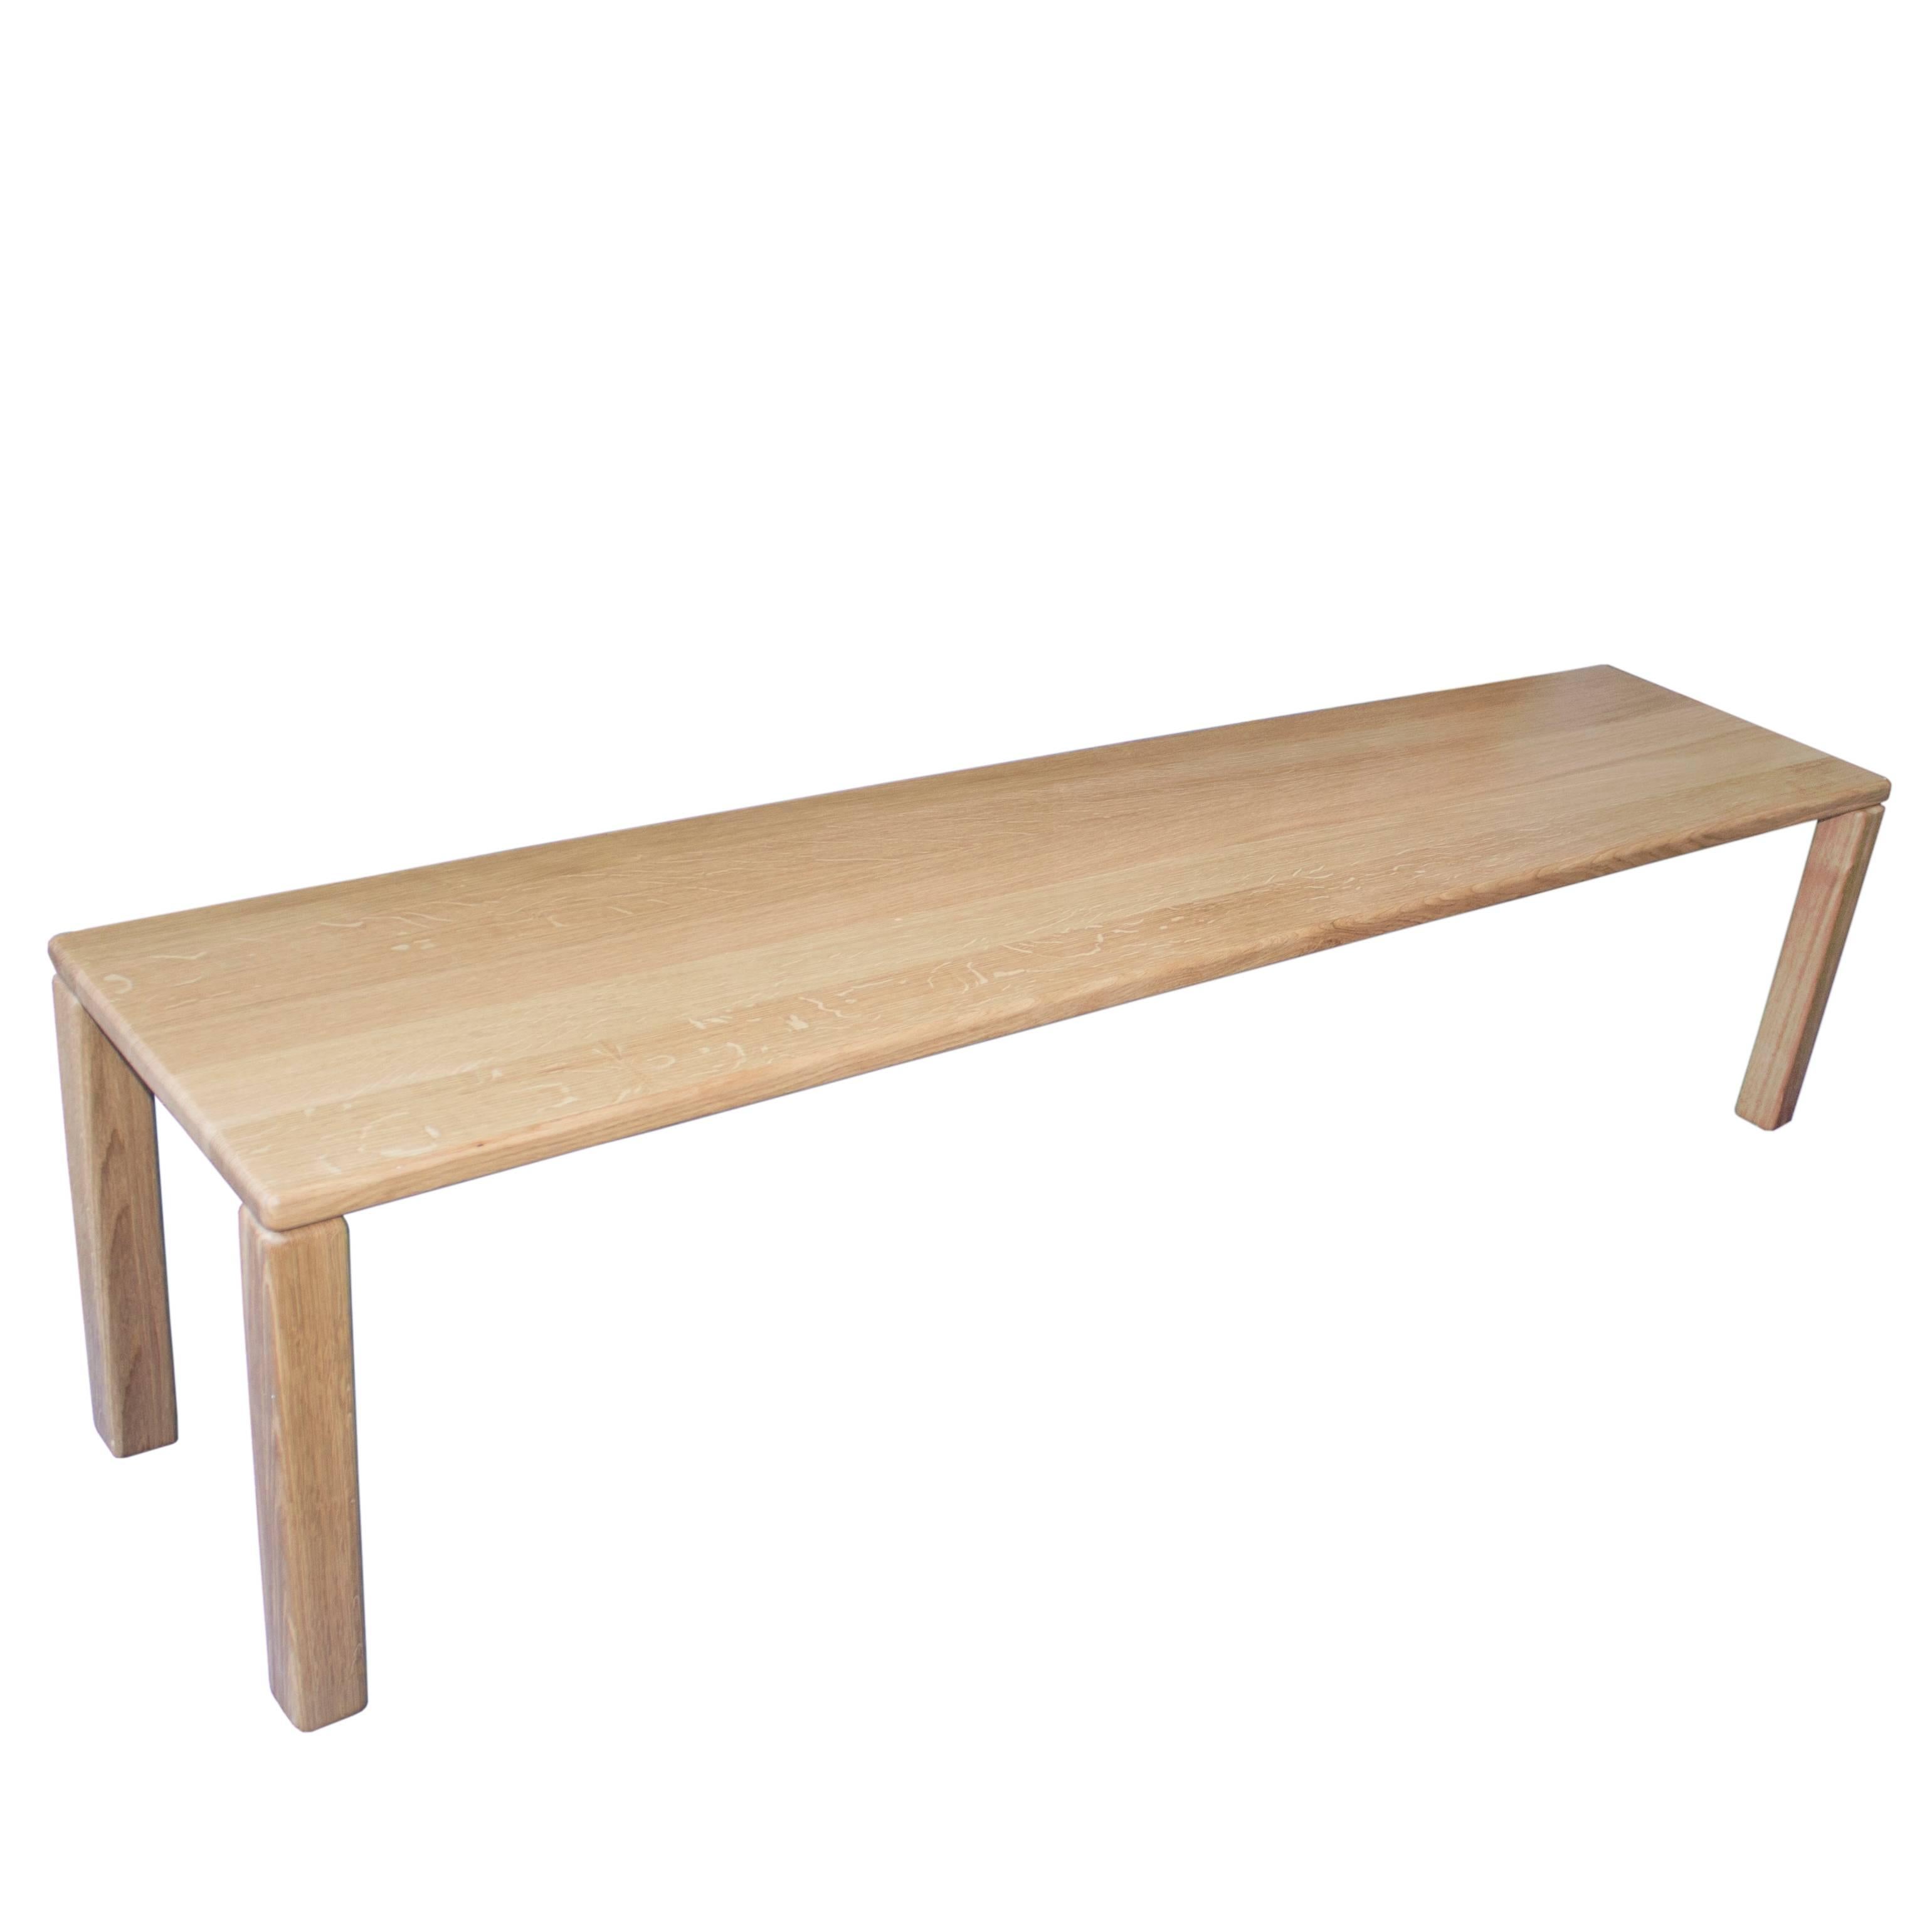 A modern classic, the Objekten element bench is a straight-lined bench at its most elemental.